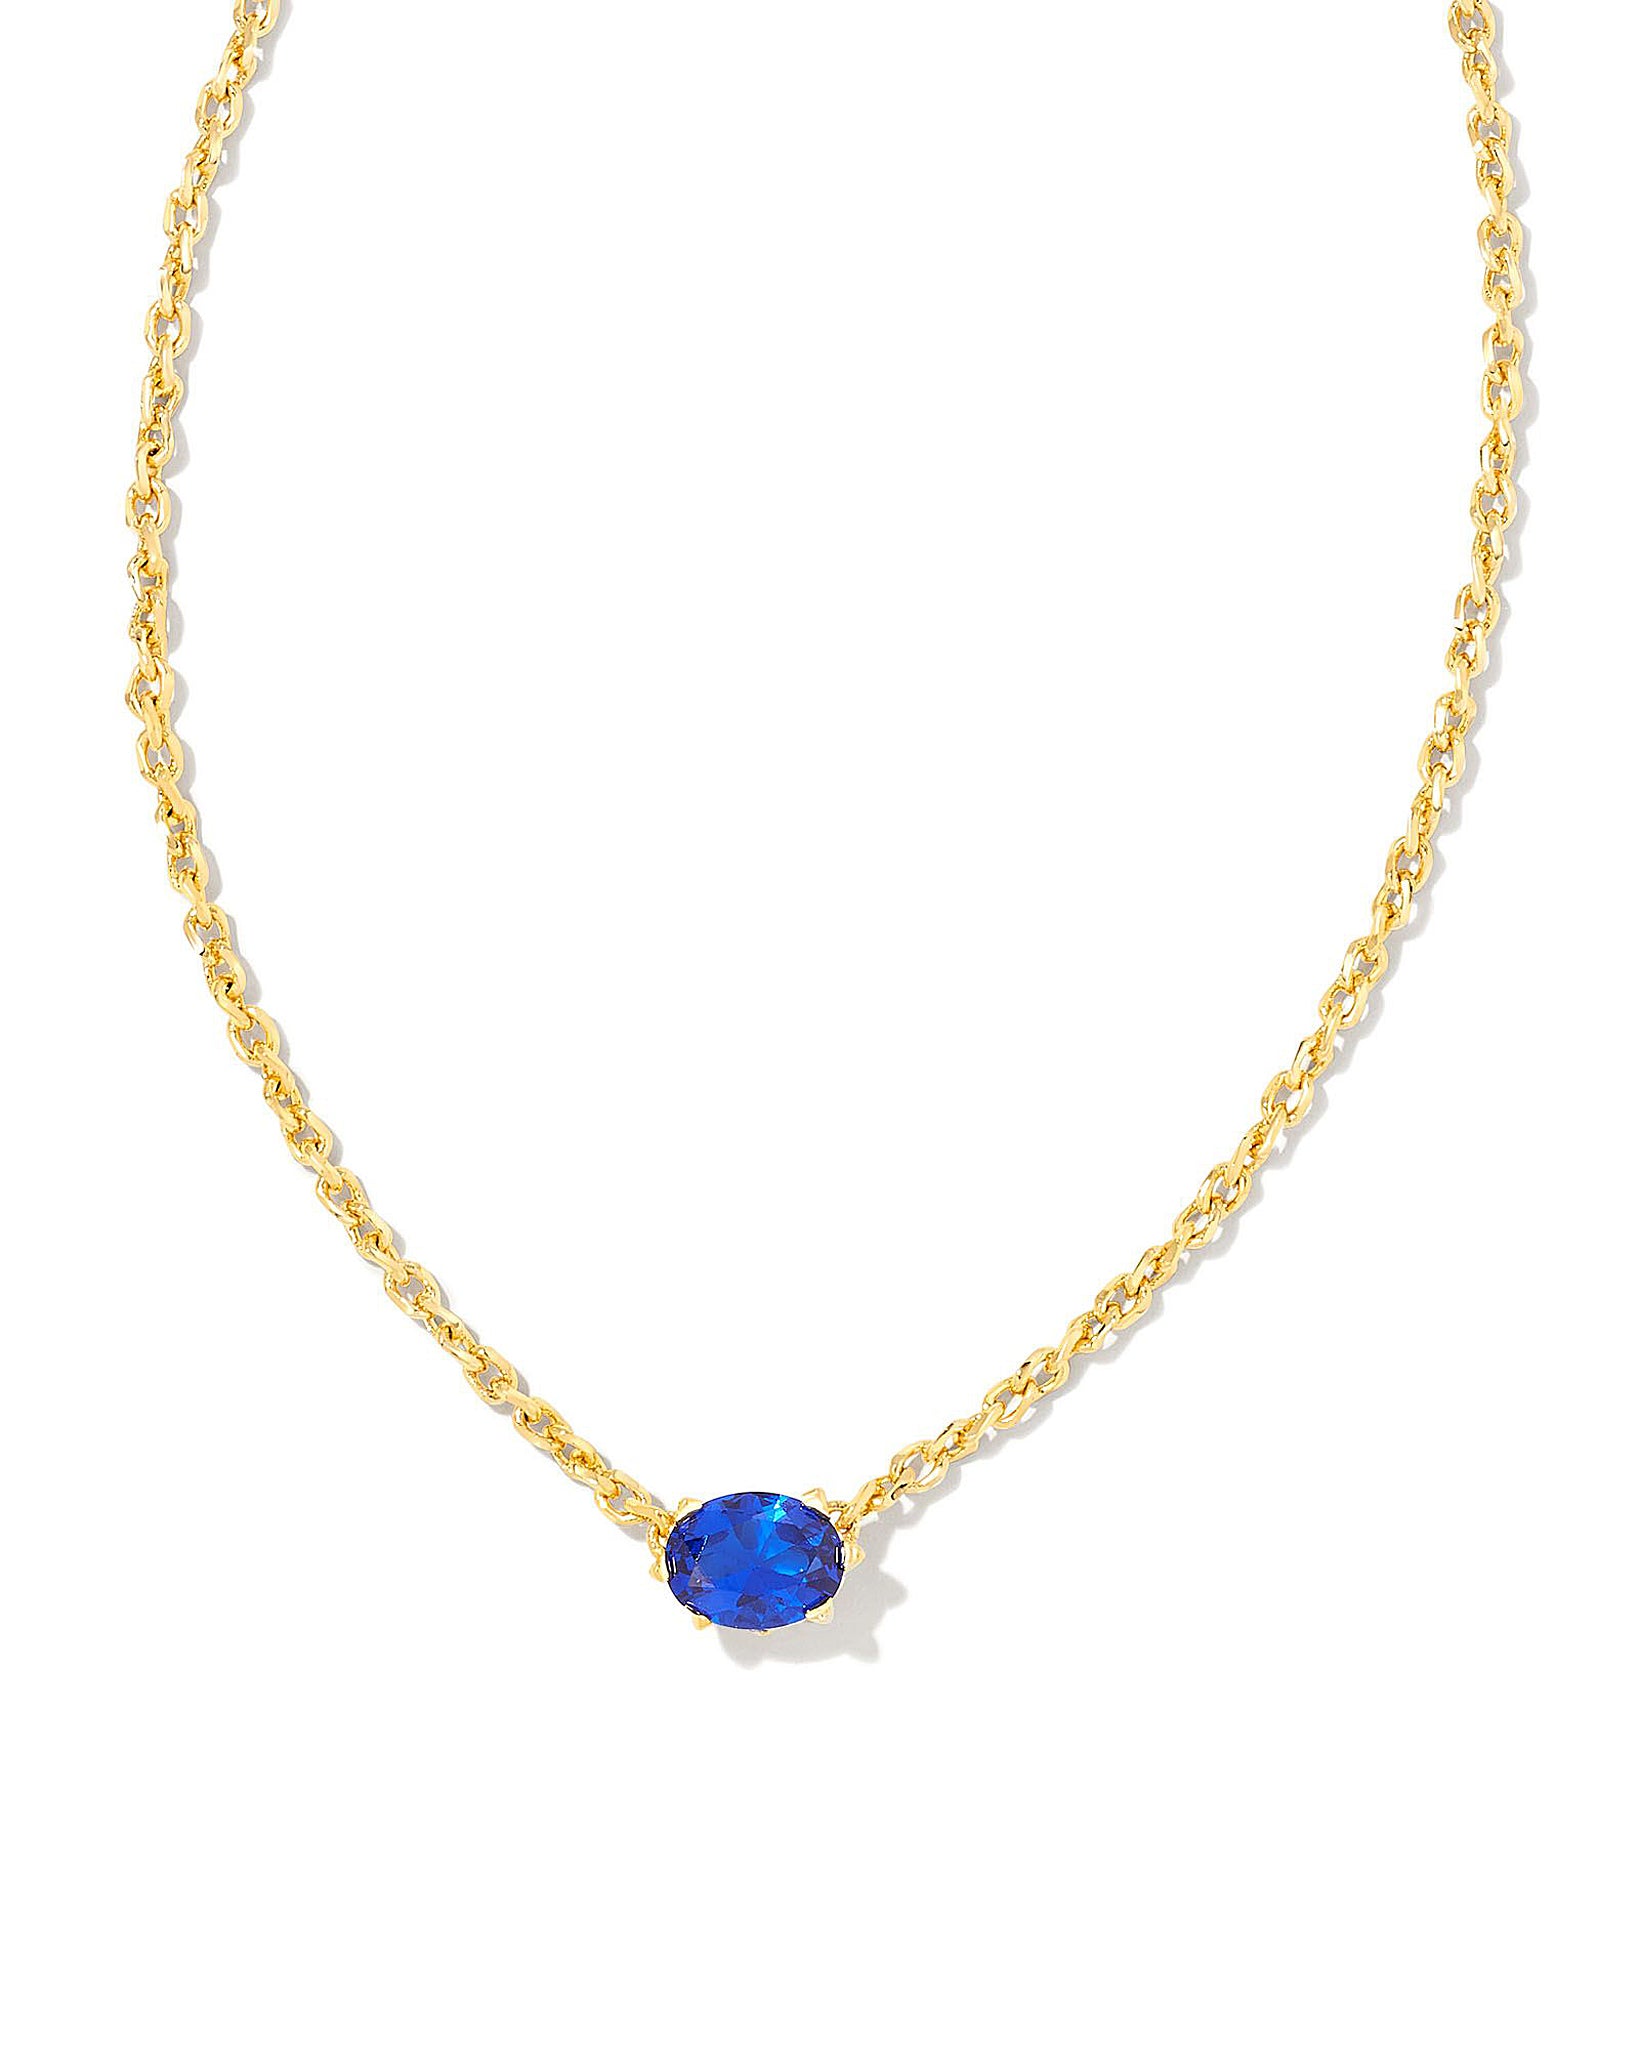 Kendra Scott Cailin Oval Pendant Necklace in Blue Crystal and Gold